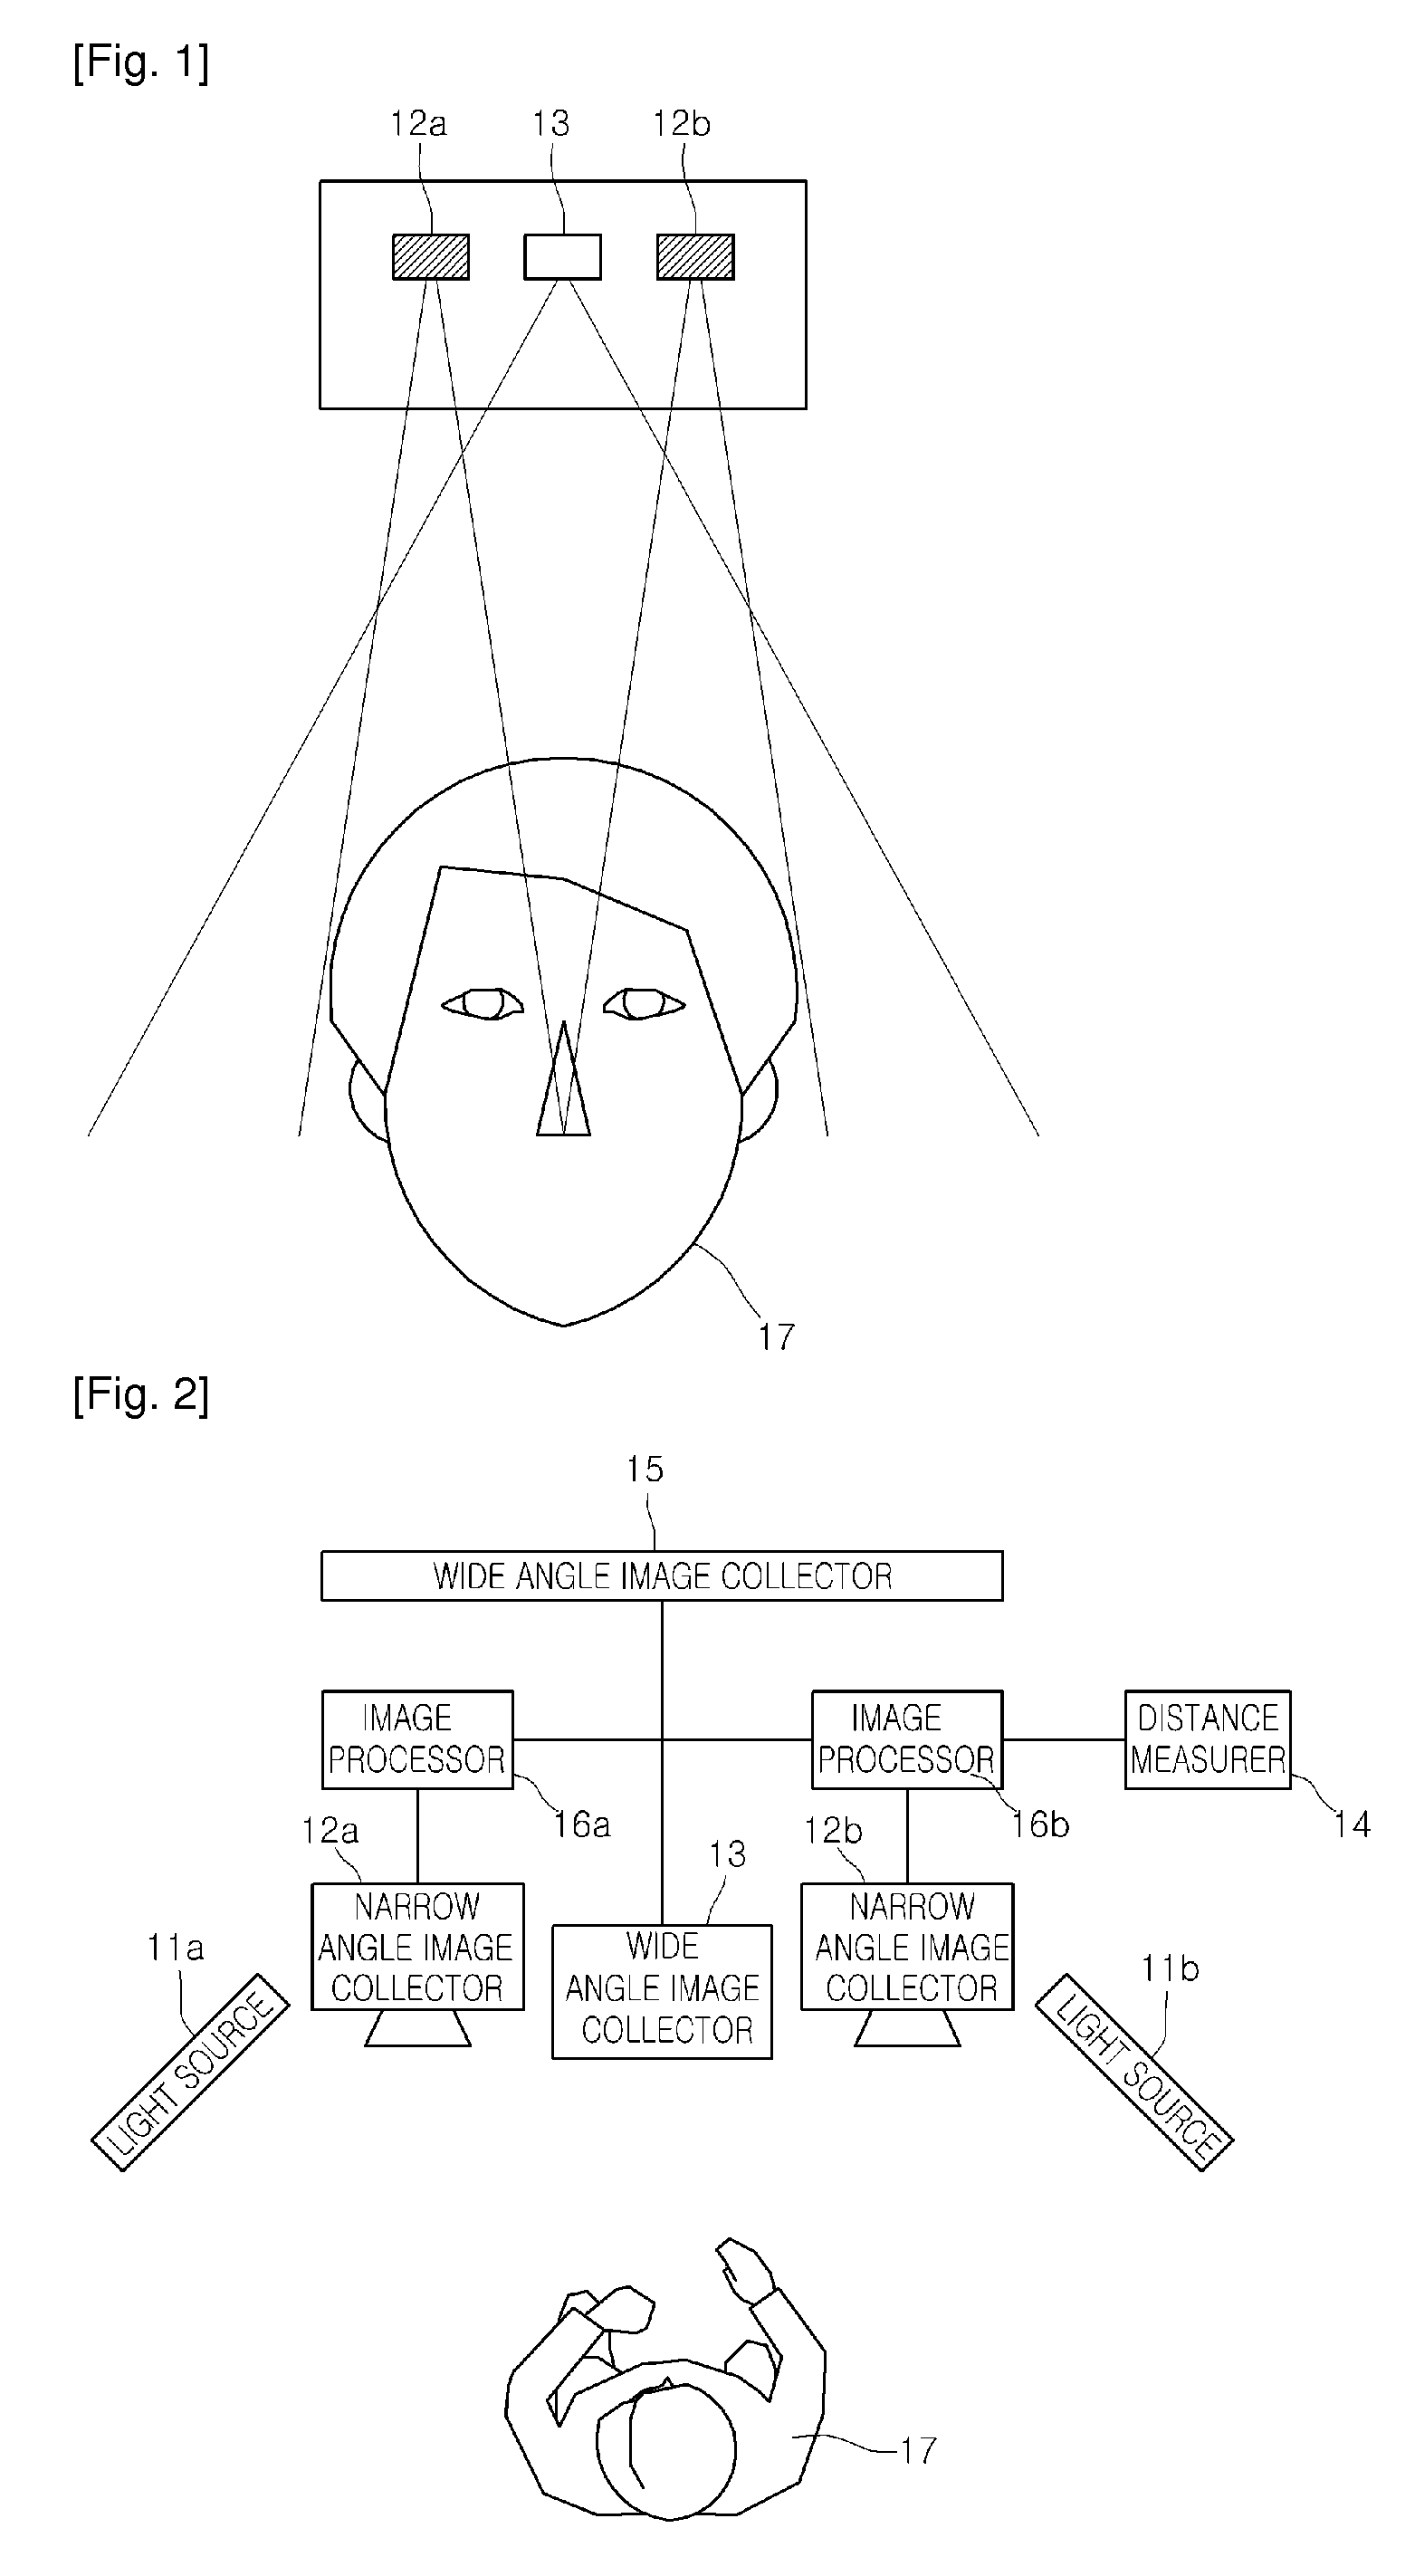 Iris scanning apparatus employing wide-angle camera, for identifying subject, and method thereof